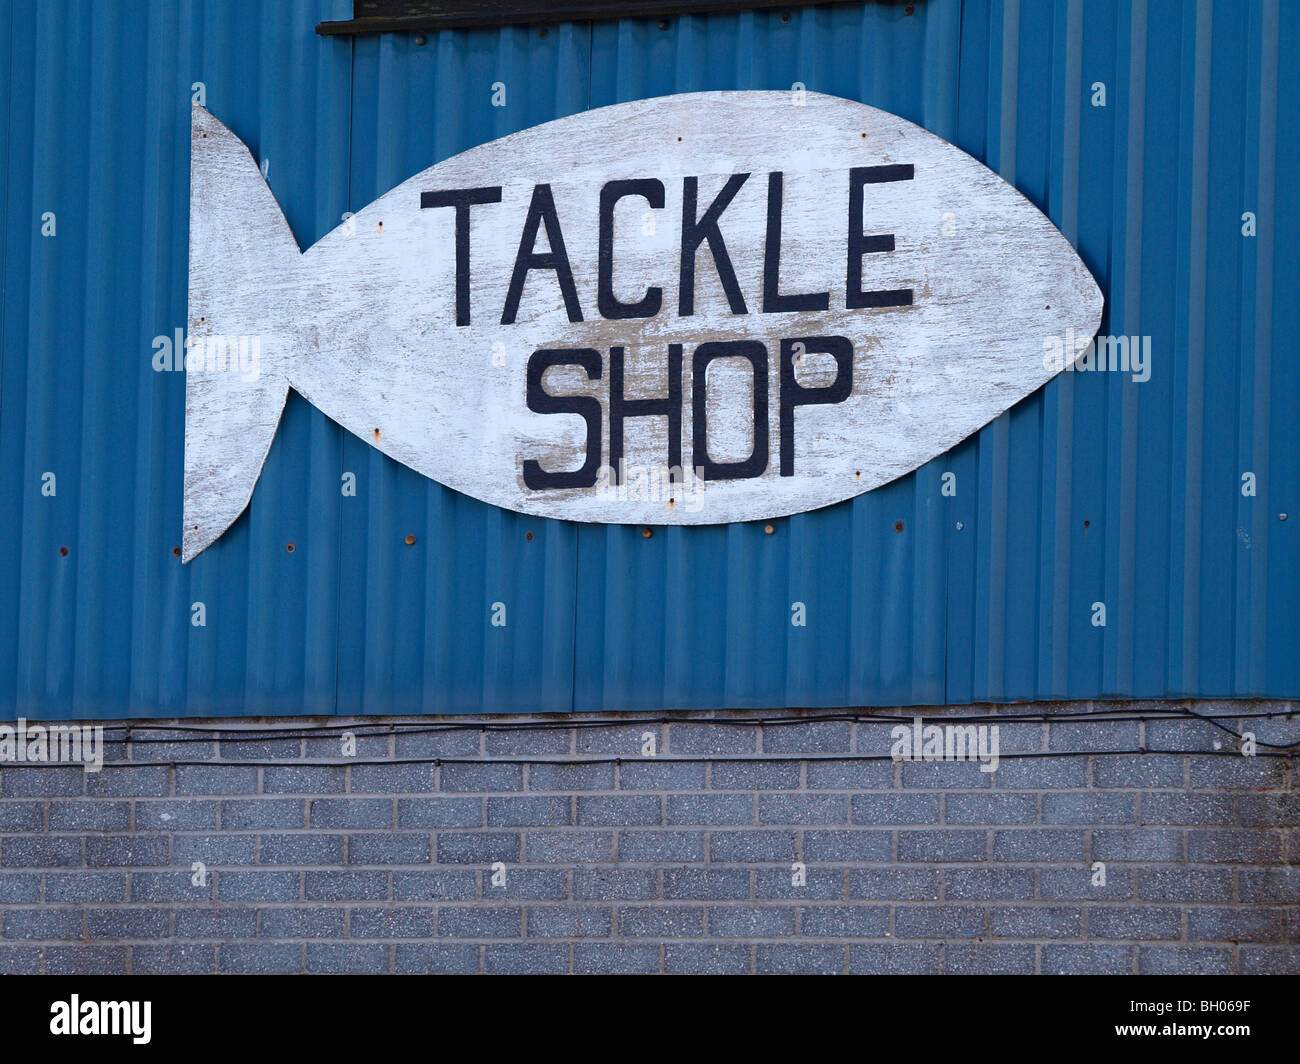 Tackle shop sign in the shape of a fish Stock Photo - Alamy